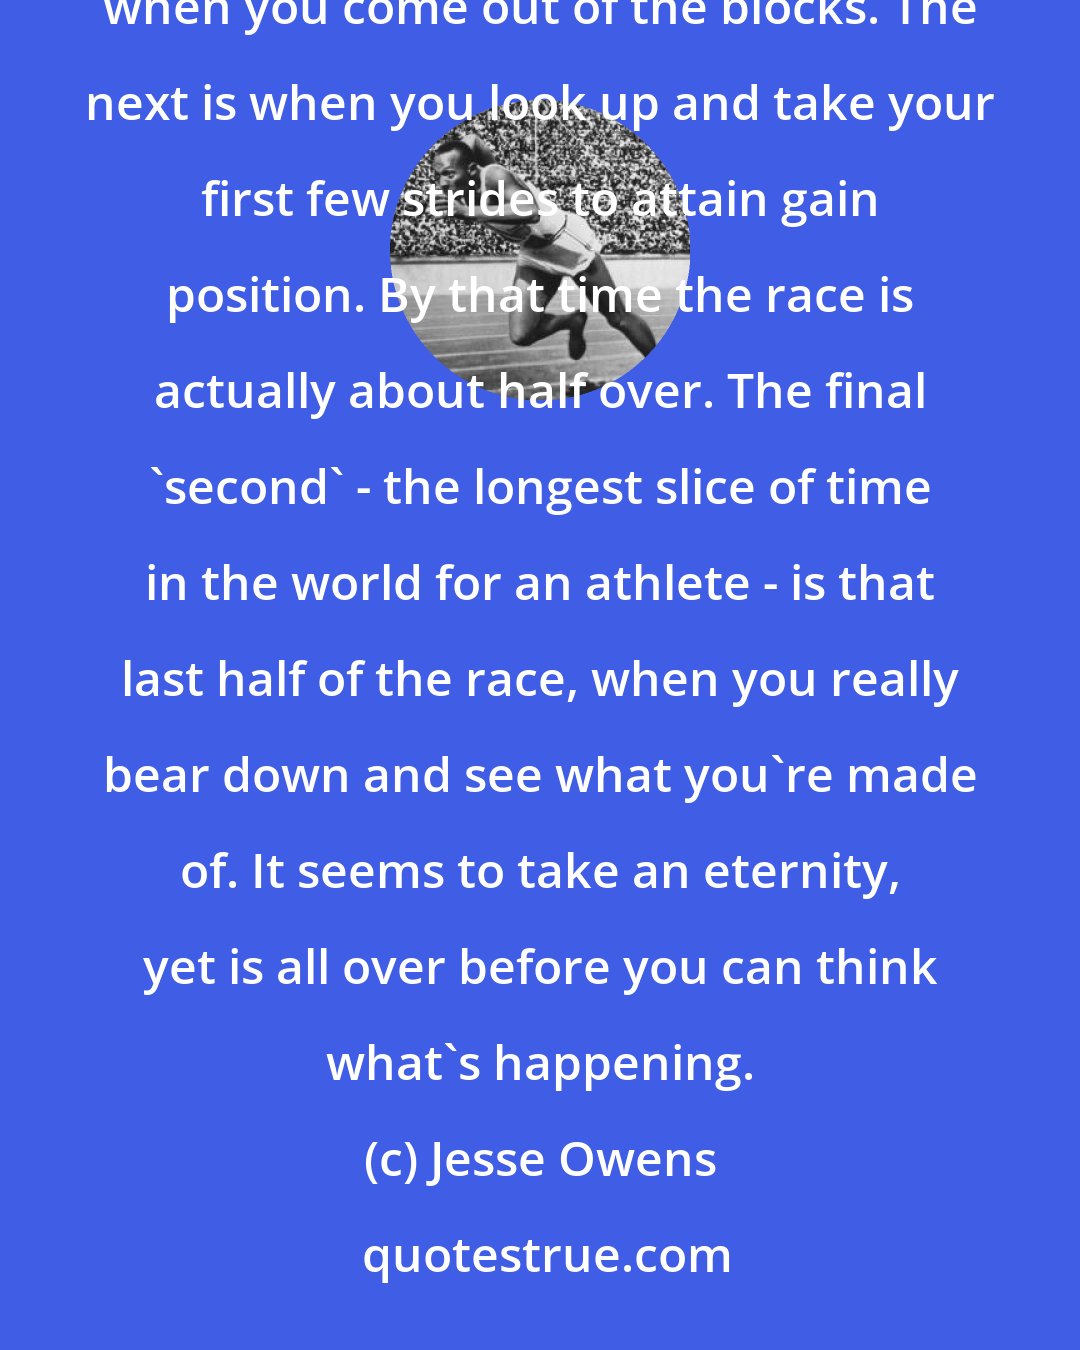 Jesse Owens: To a sprinter, the hundred-yard dash is over in three seconds, not nine or ten. The first 'second' is when you come out of the blocks. The next is when you look up and take your first few strides to attain gain position. By that time the race is actually about half over. The final 'second' - the longest slice of time in the world for an athlete - is that last half of the race, when you really bear down and see what you're made of. It seems to take an eternity, yet is all over before you can think what's happening.